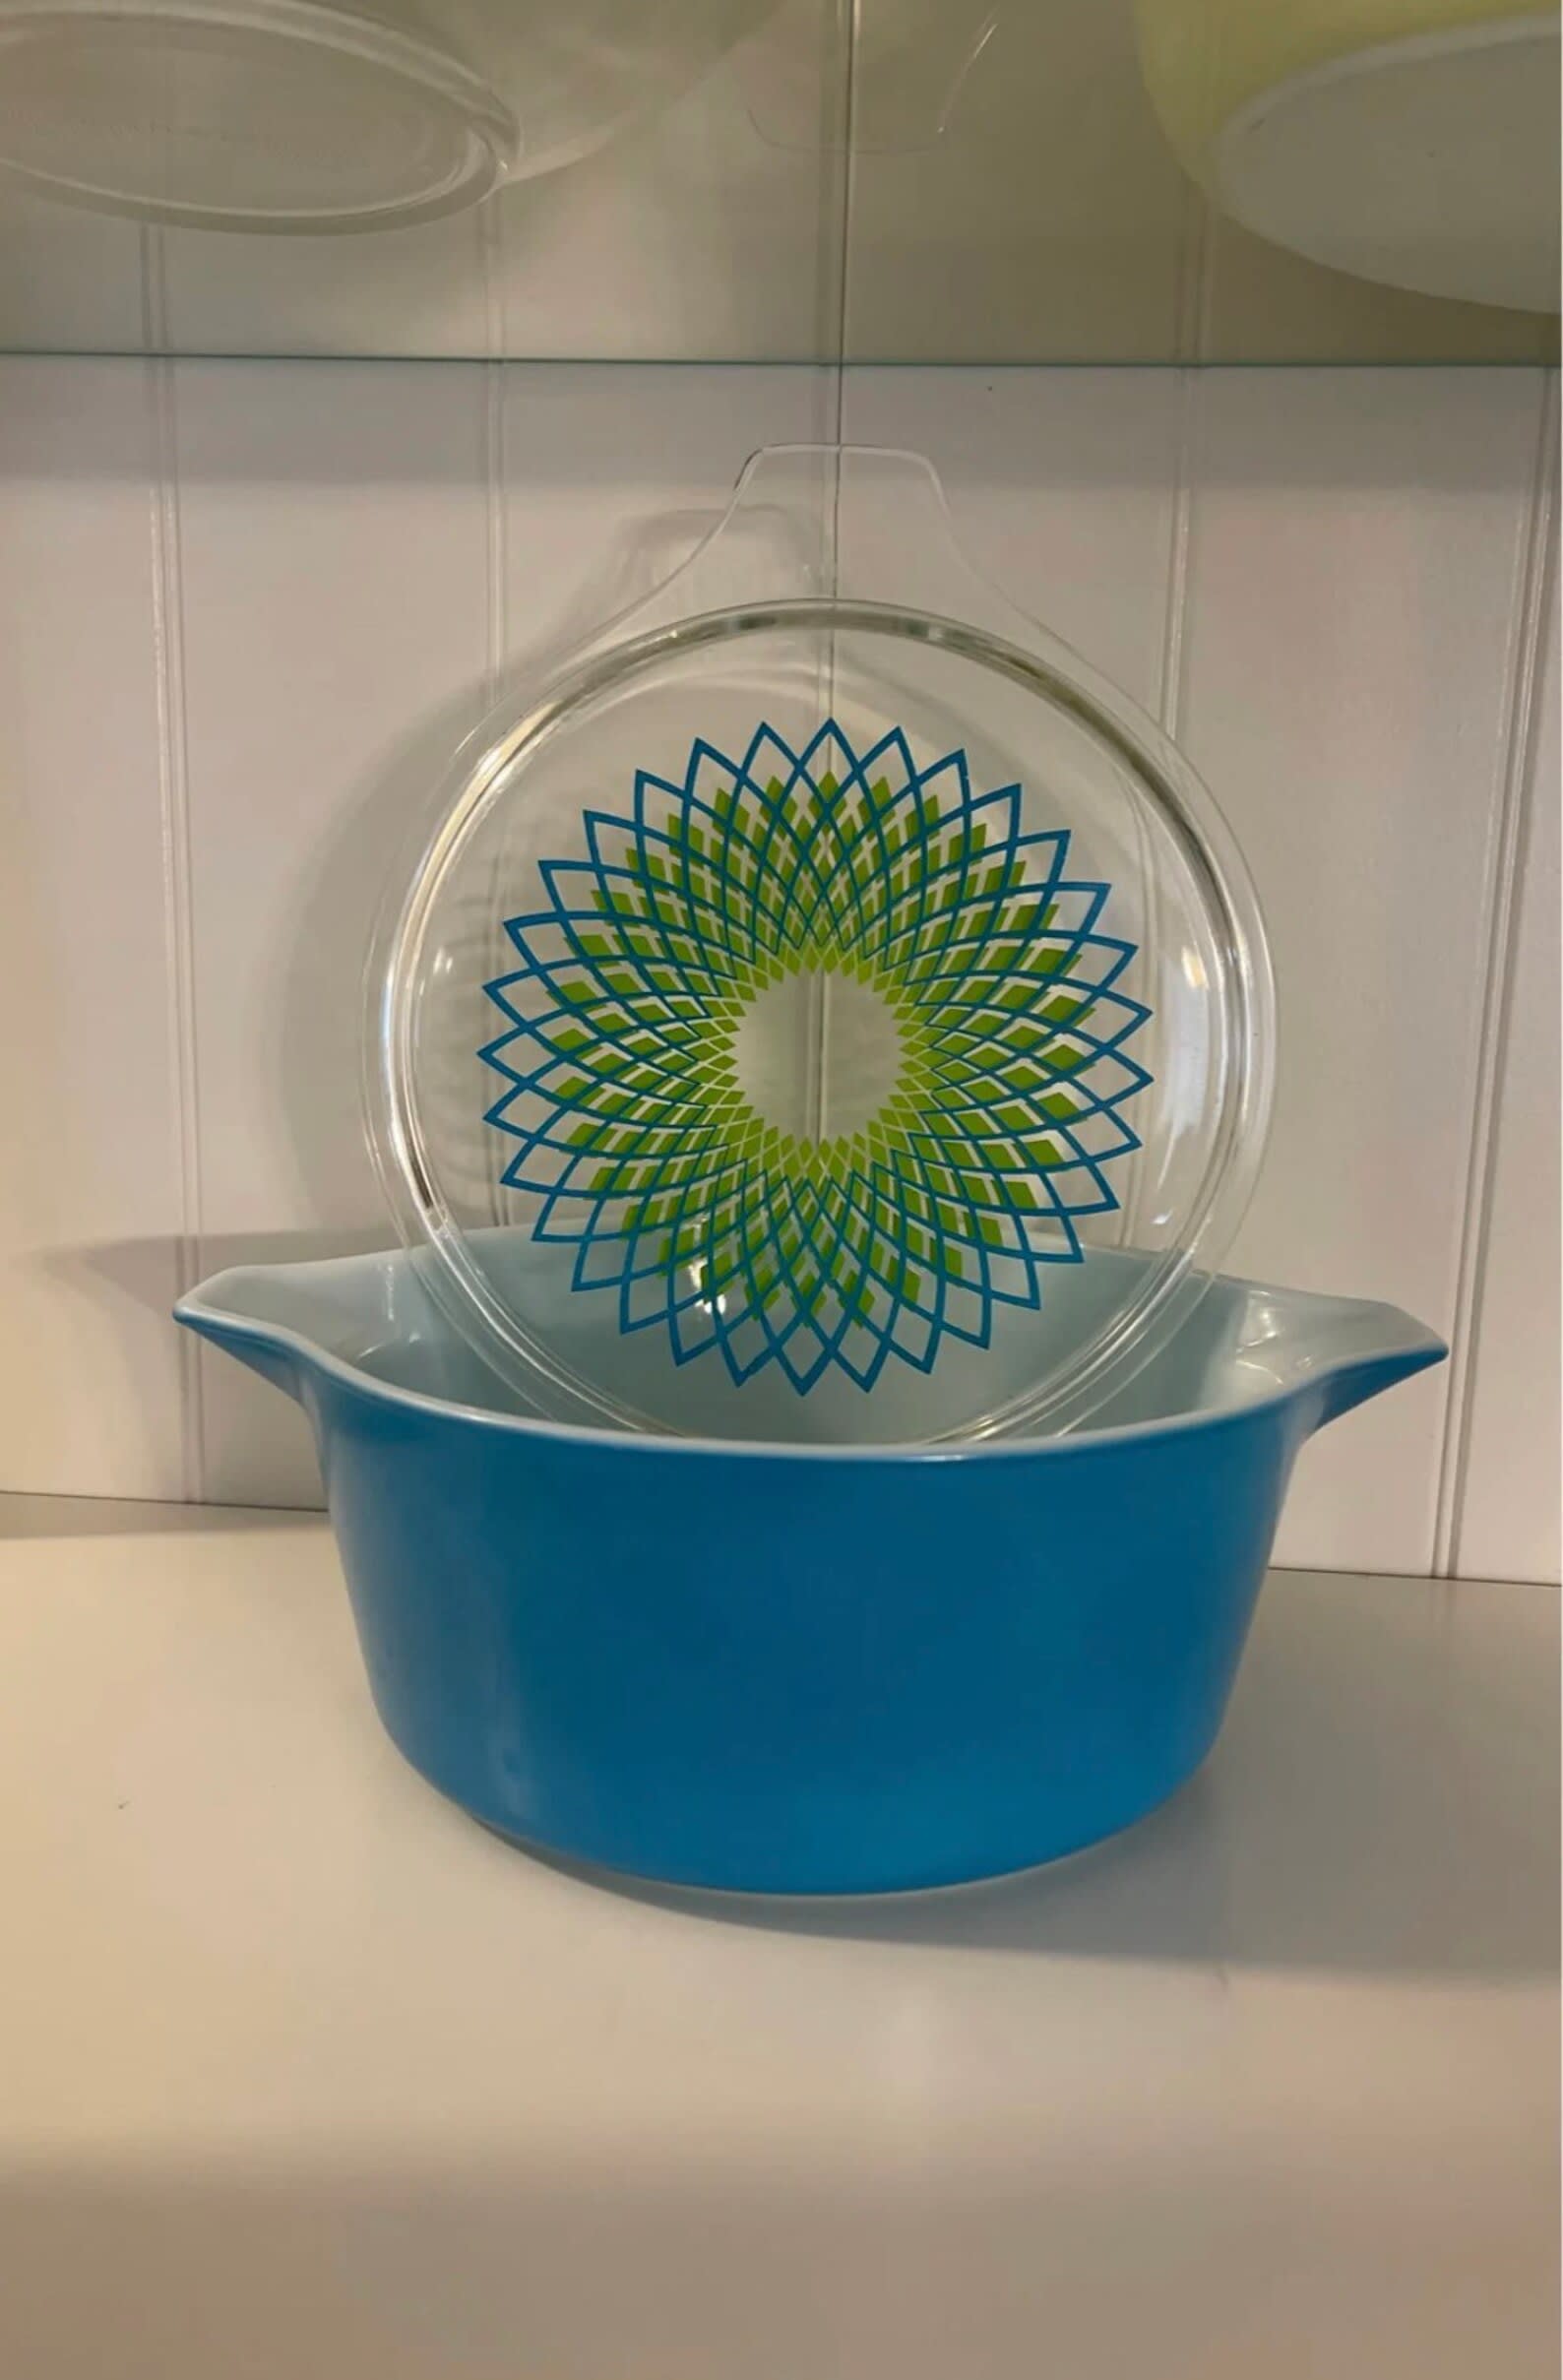 http://cdn.apartmenttherapy.info/image/upload/v1654099374/Vintage%20Pyrex%20Spirograph%20Casserole%20Dish%20with%20Lid.jpg